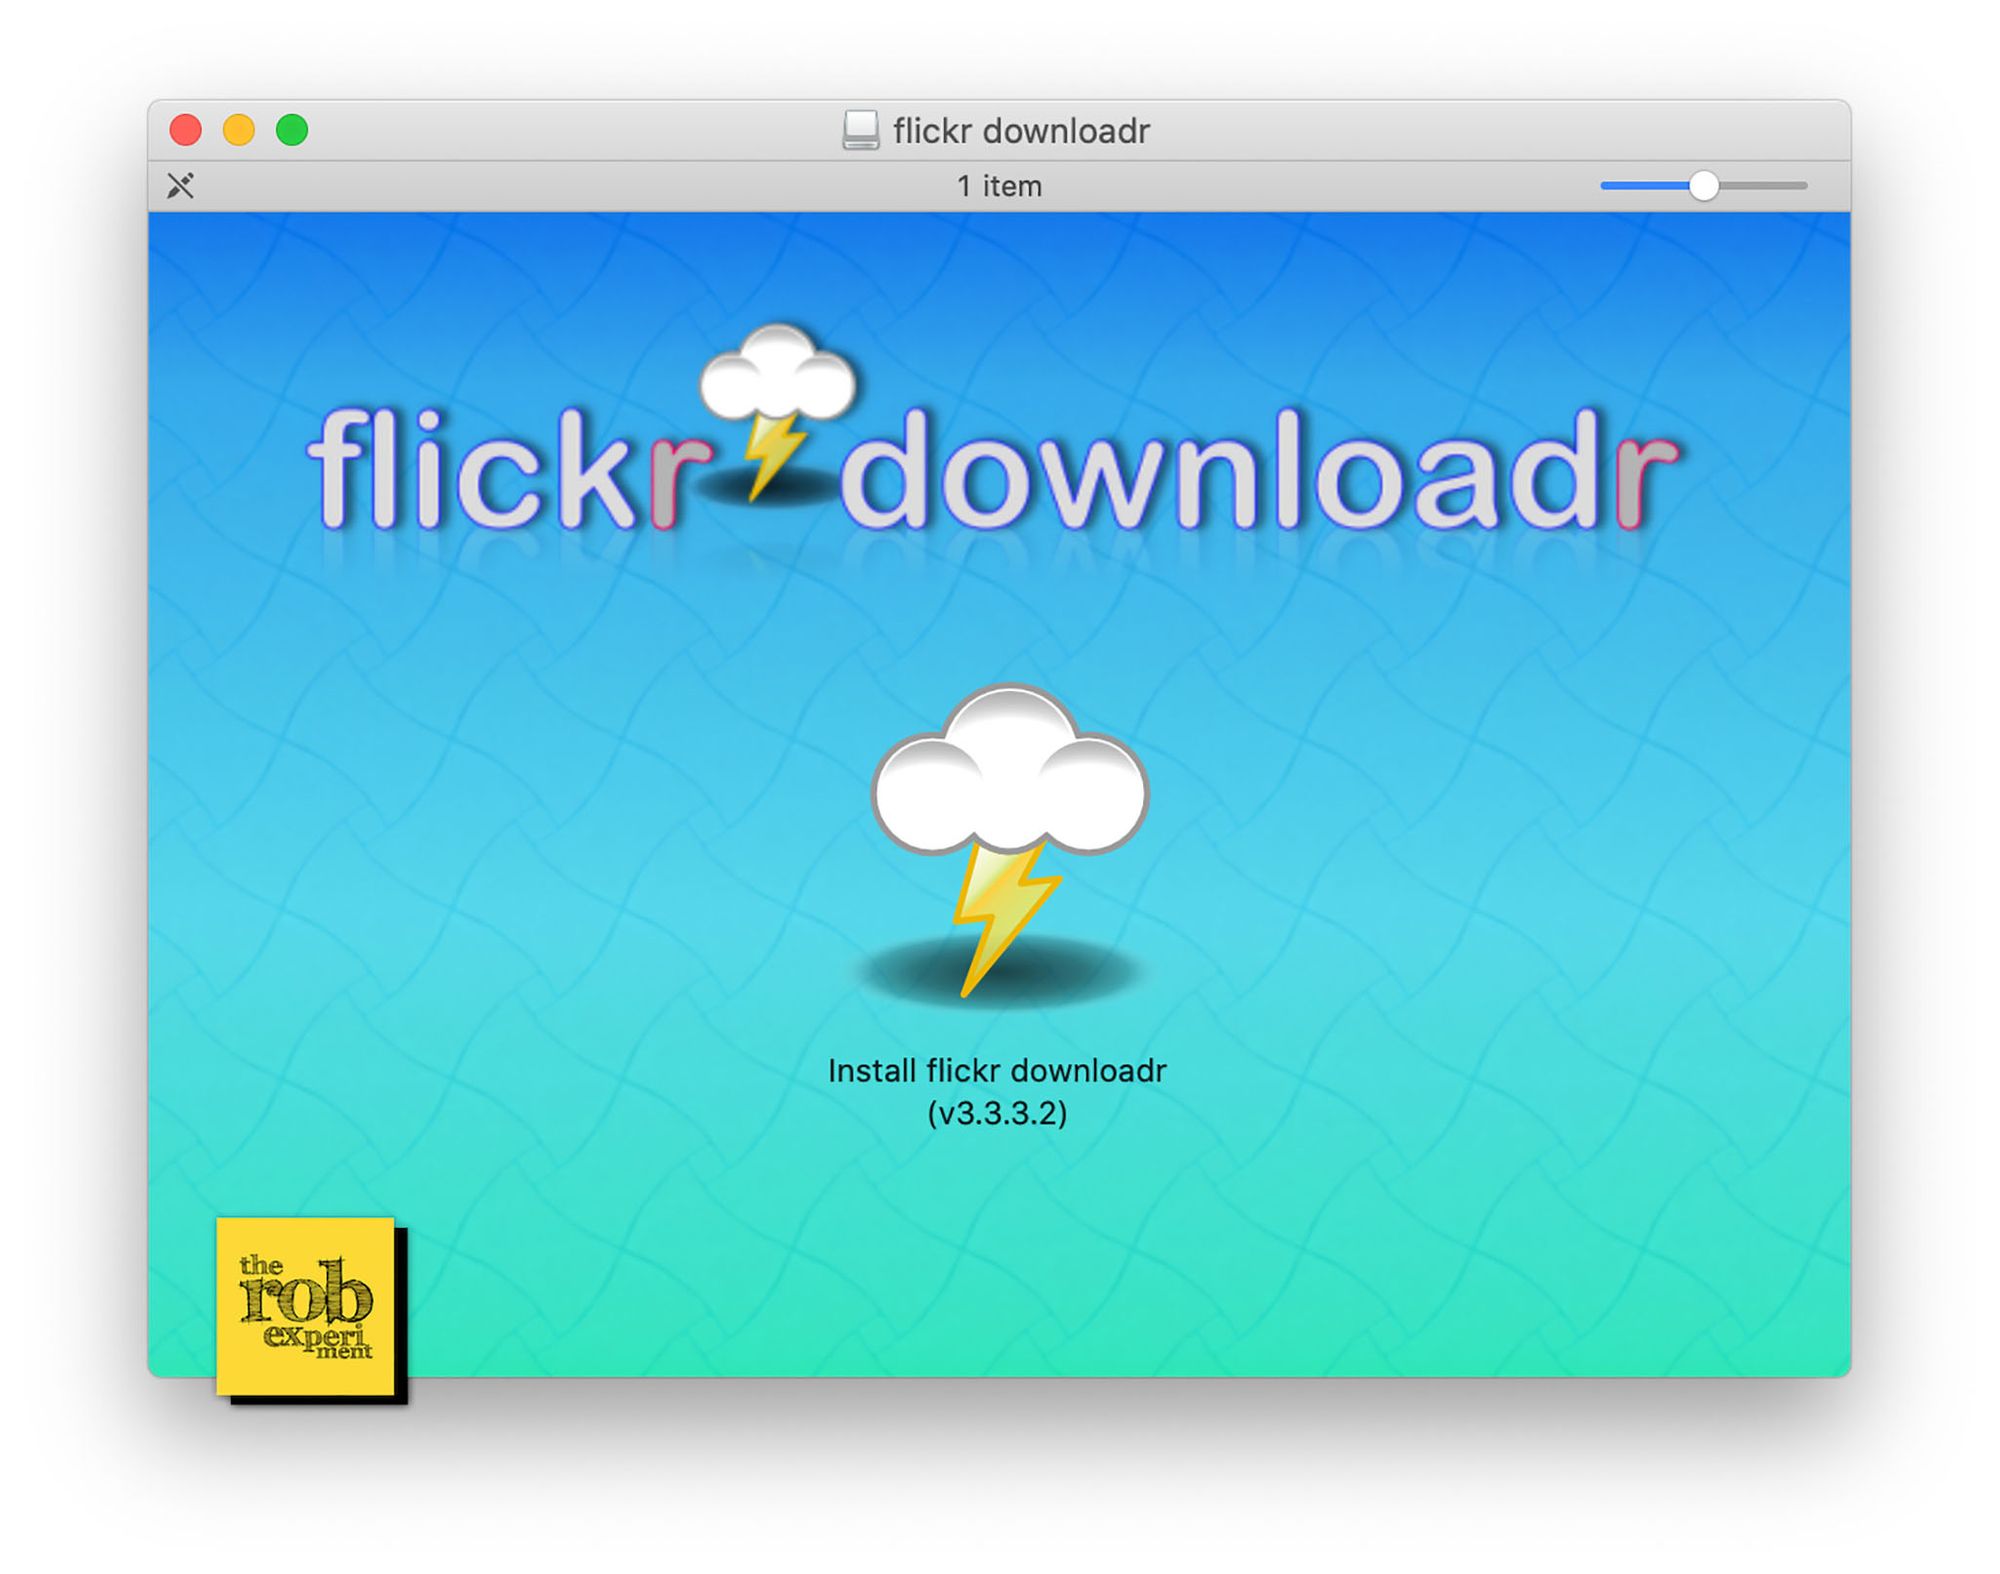 How To Use Flickr Downloadr To Bulk Backup All Your Flickr Albums On A Mac?